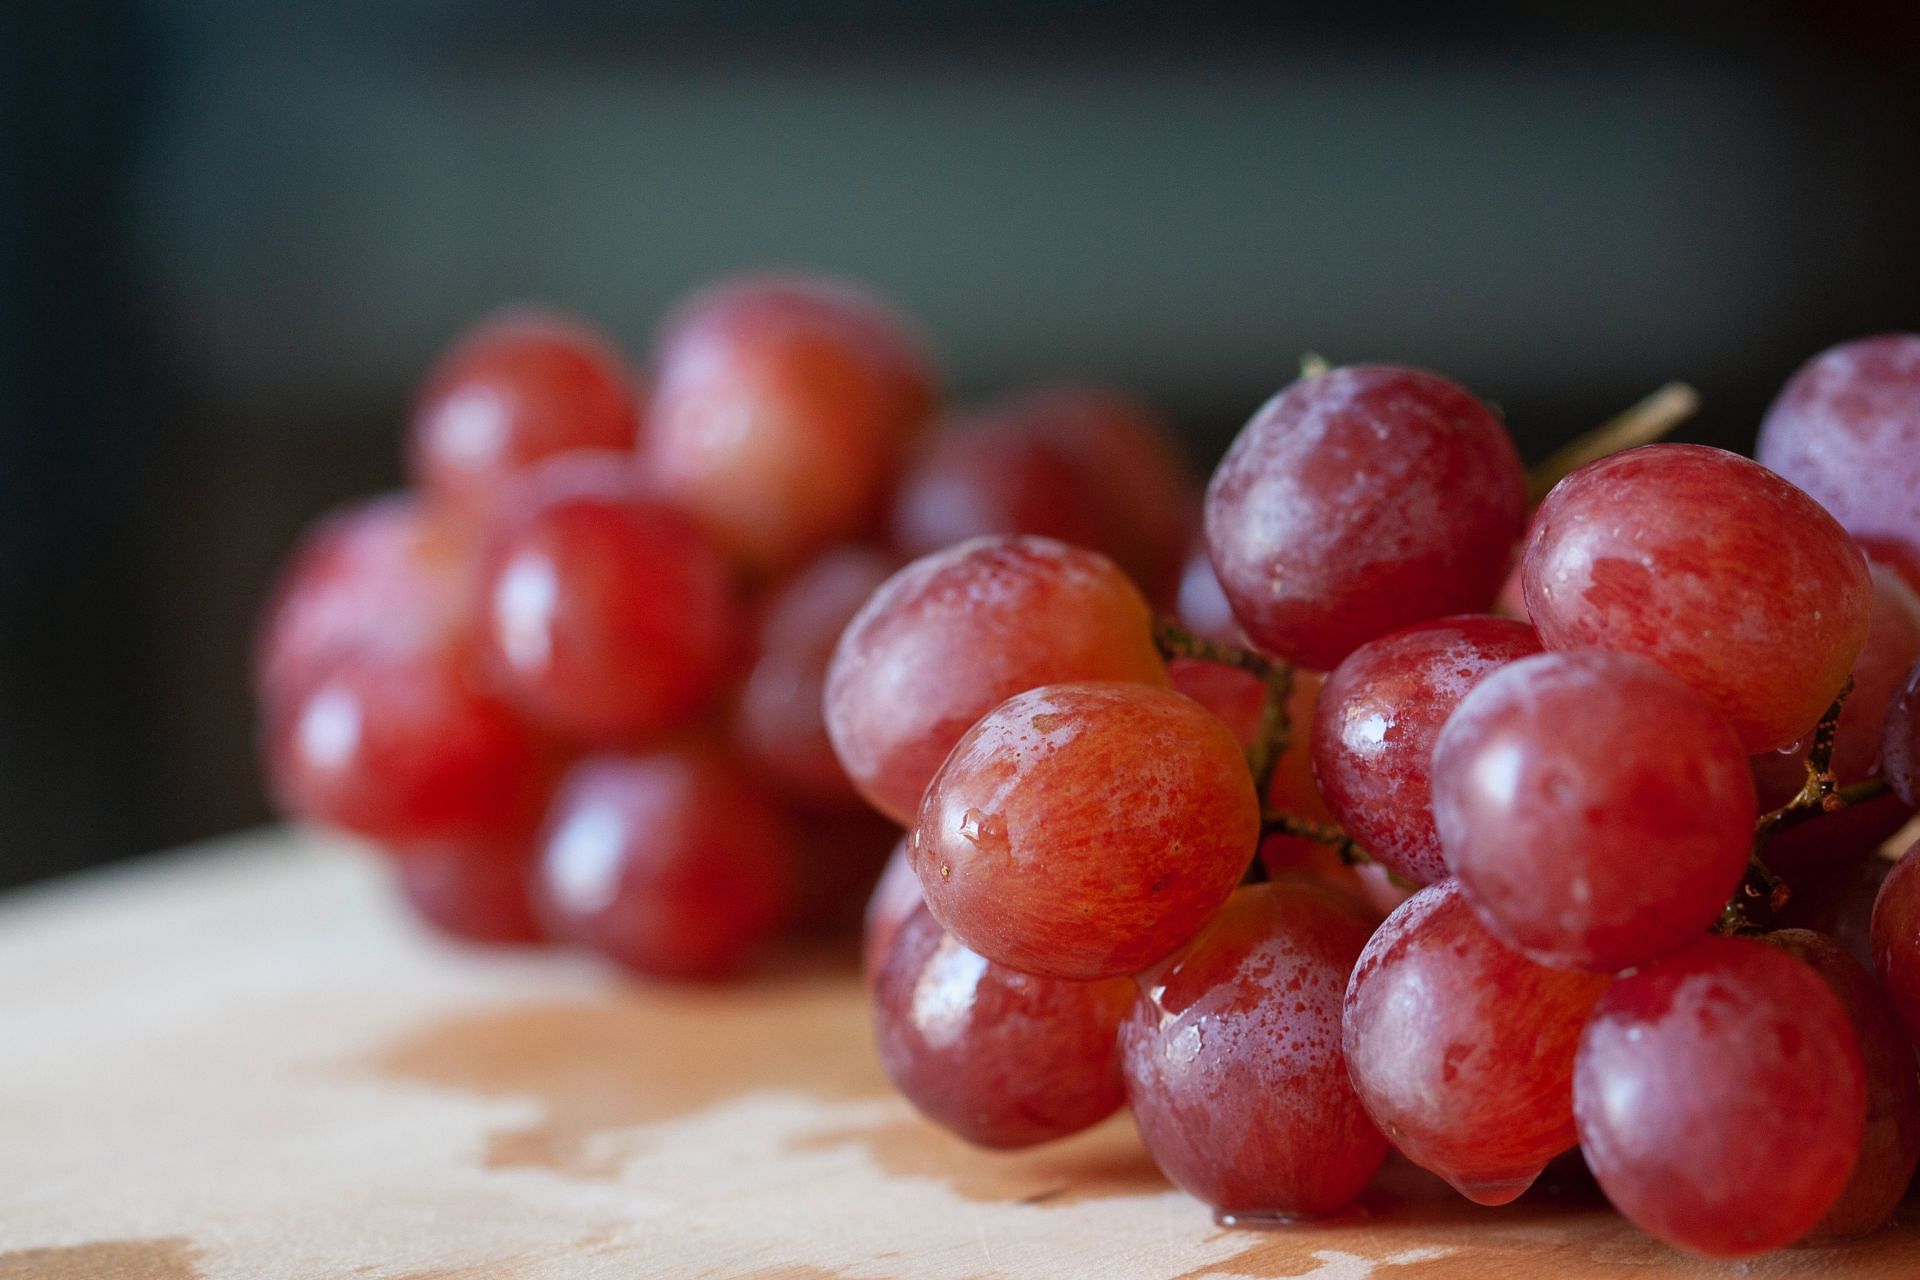 Red grapes are nutritious and tasty (Image via Unsplash/J Yeo)